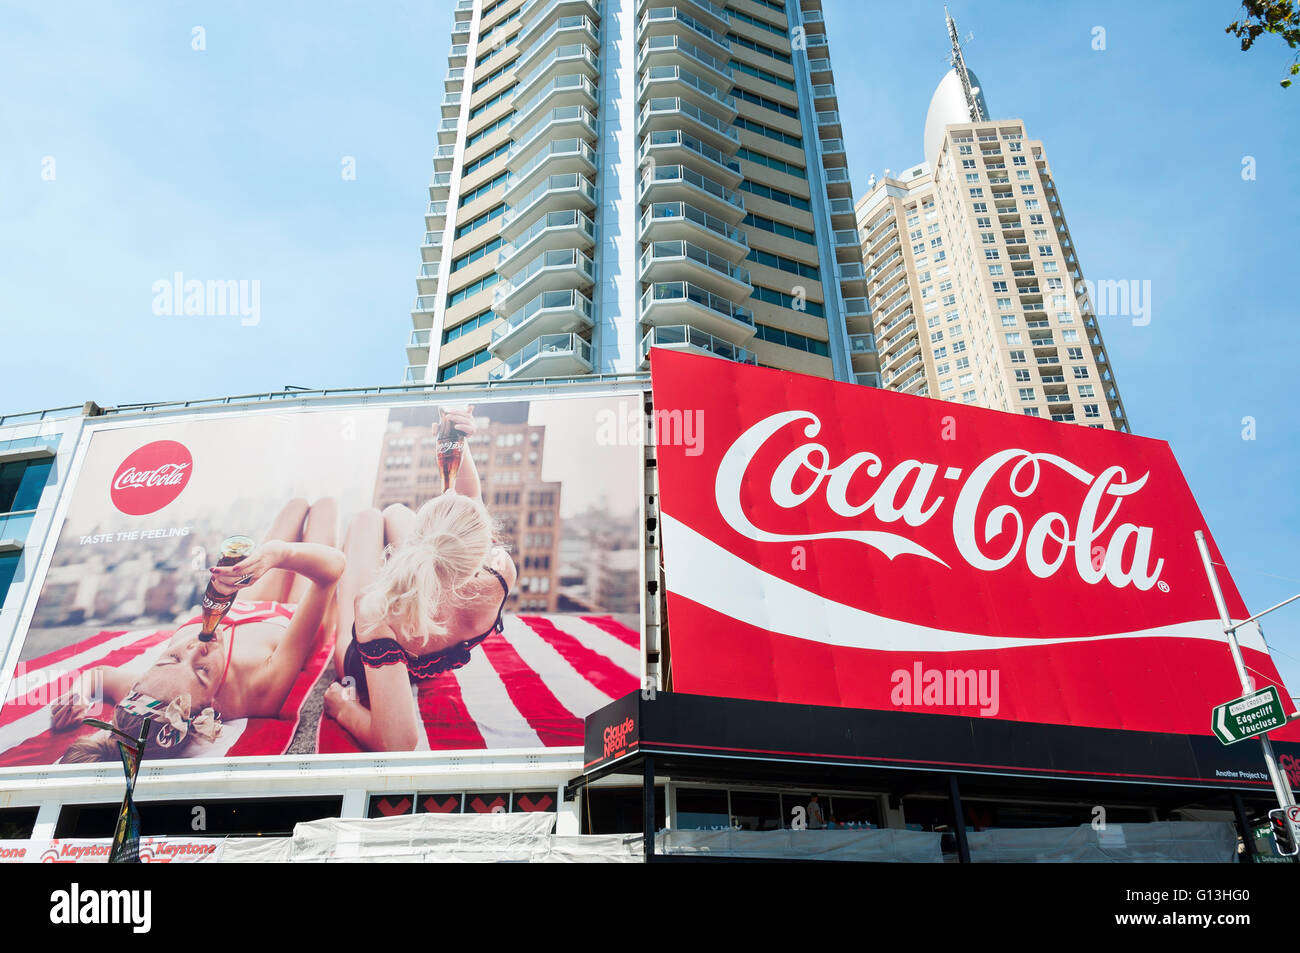 Coca Cola Billboards and high-rise apartments, Darlinghurst Road, Kings Cross, Sydney, New South Wales, Australia Stock Photo